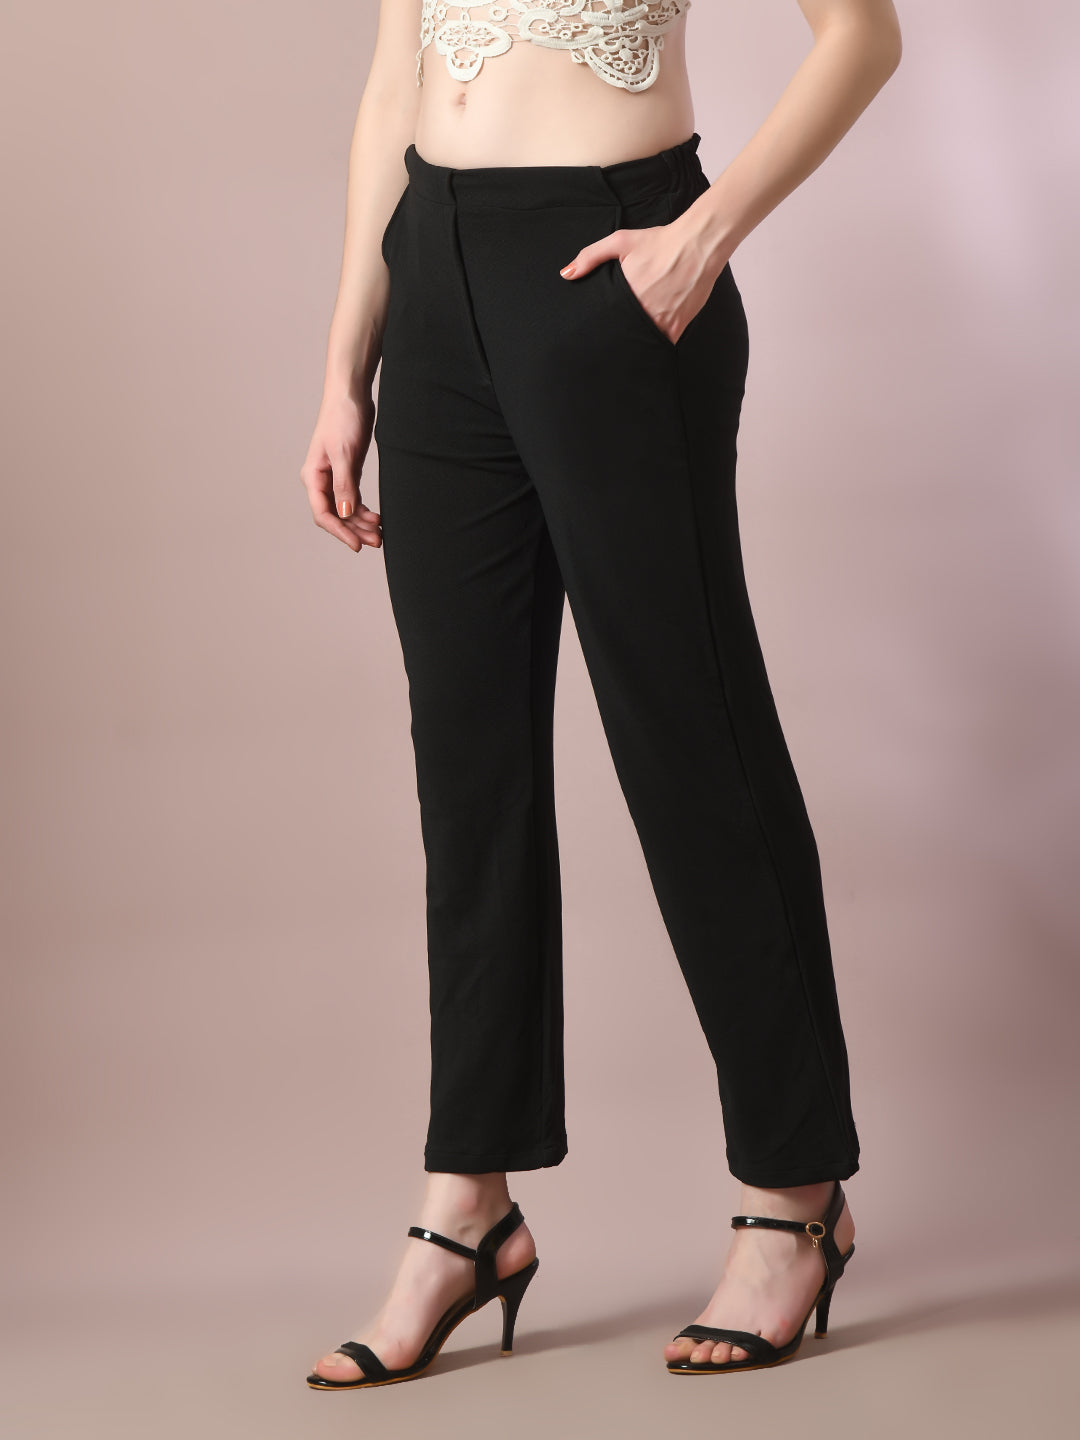 Women's Black Solid Party Straight Trousers - Myshka